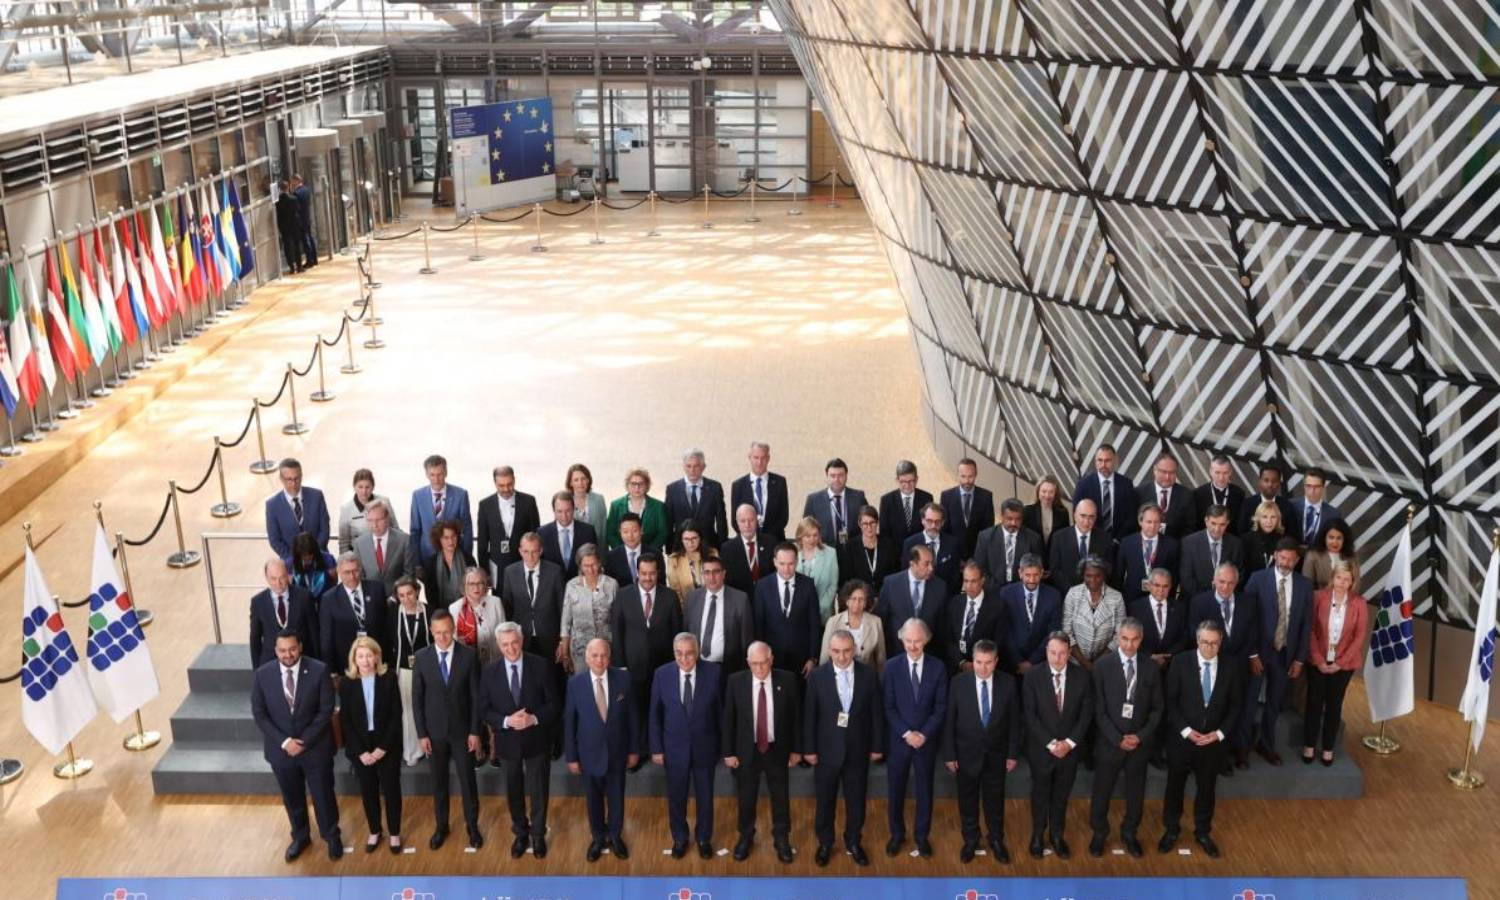 Meeting of the foreign ministers of the countries participating in the Brussels VI Conference (conference website)